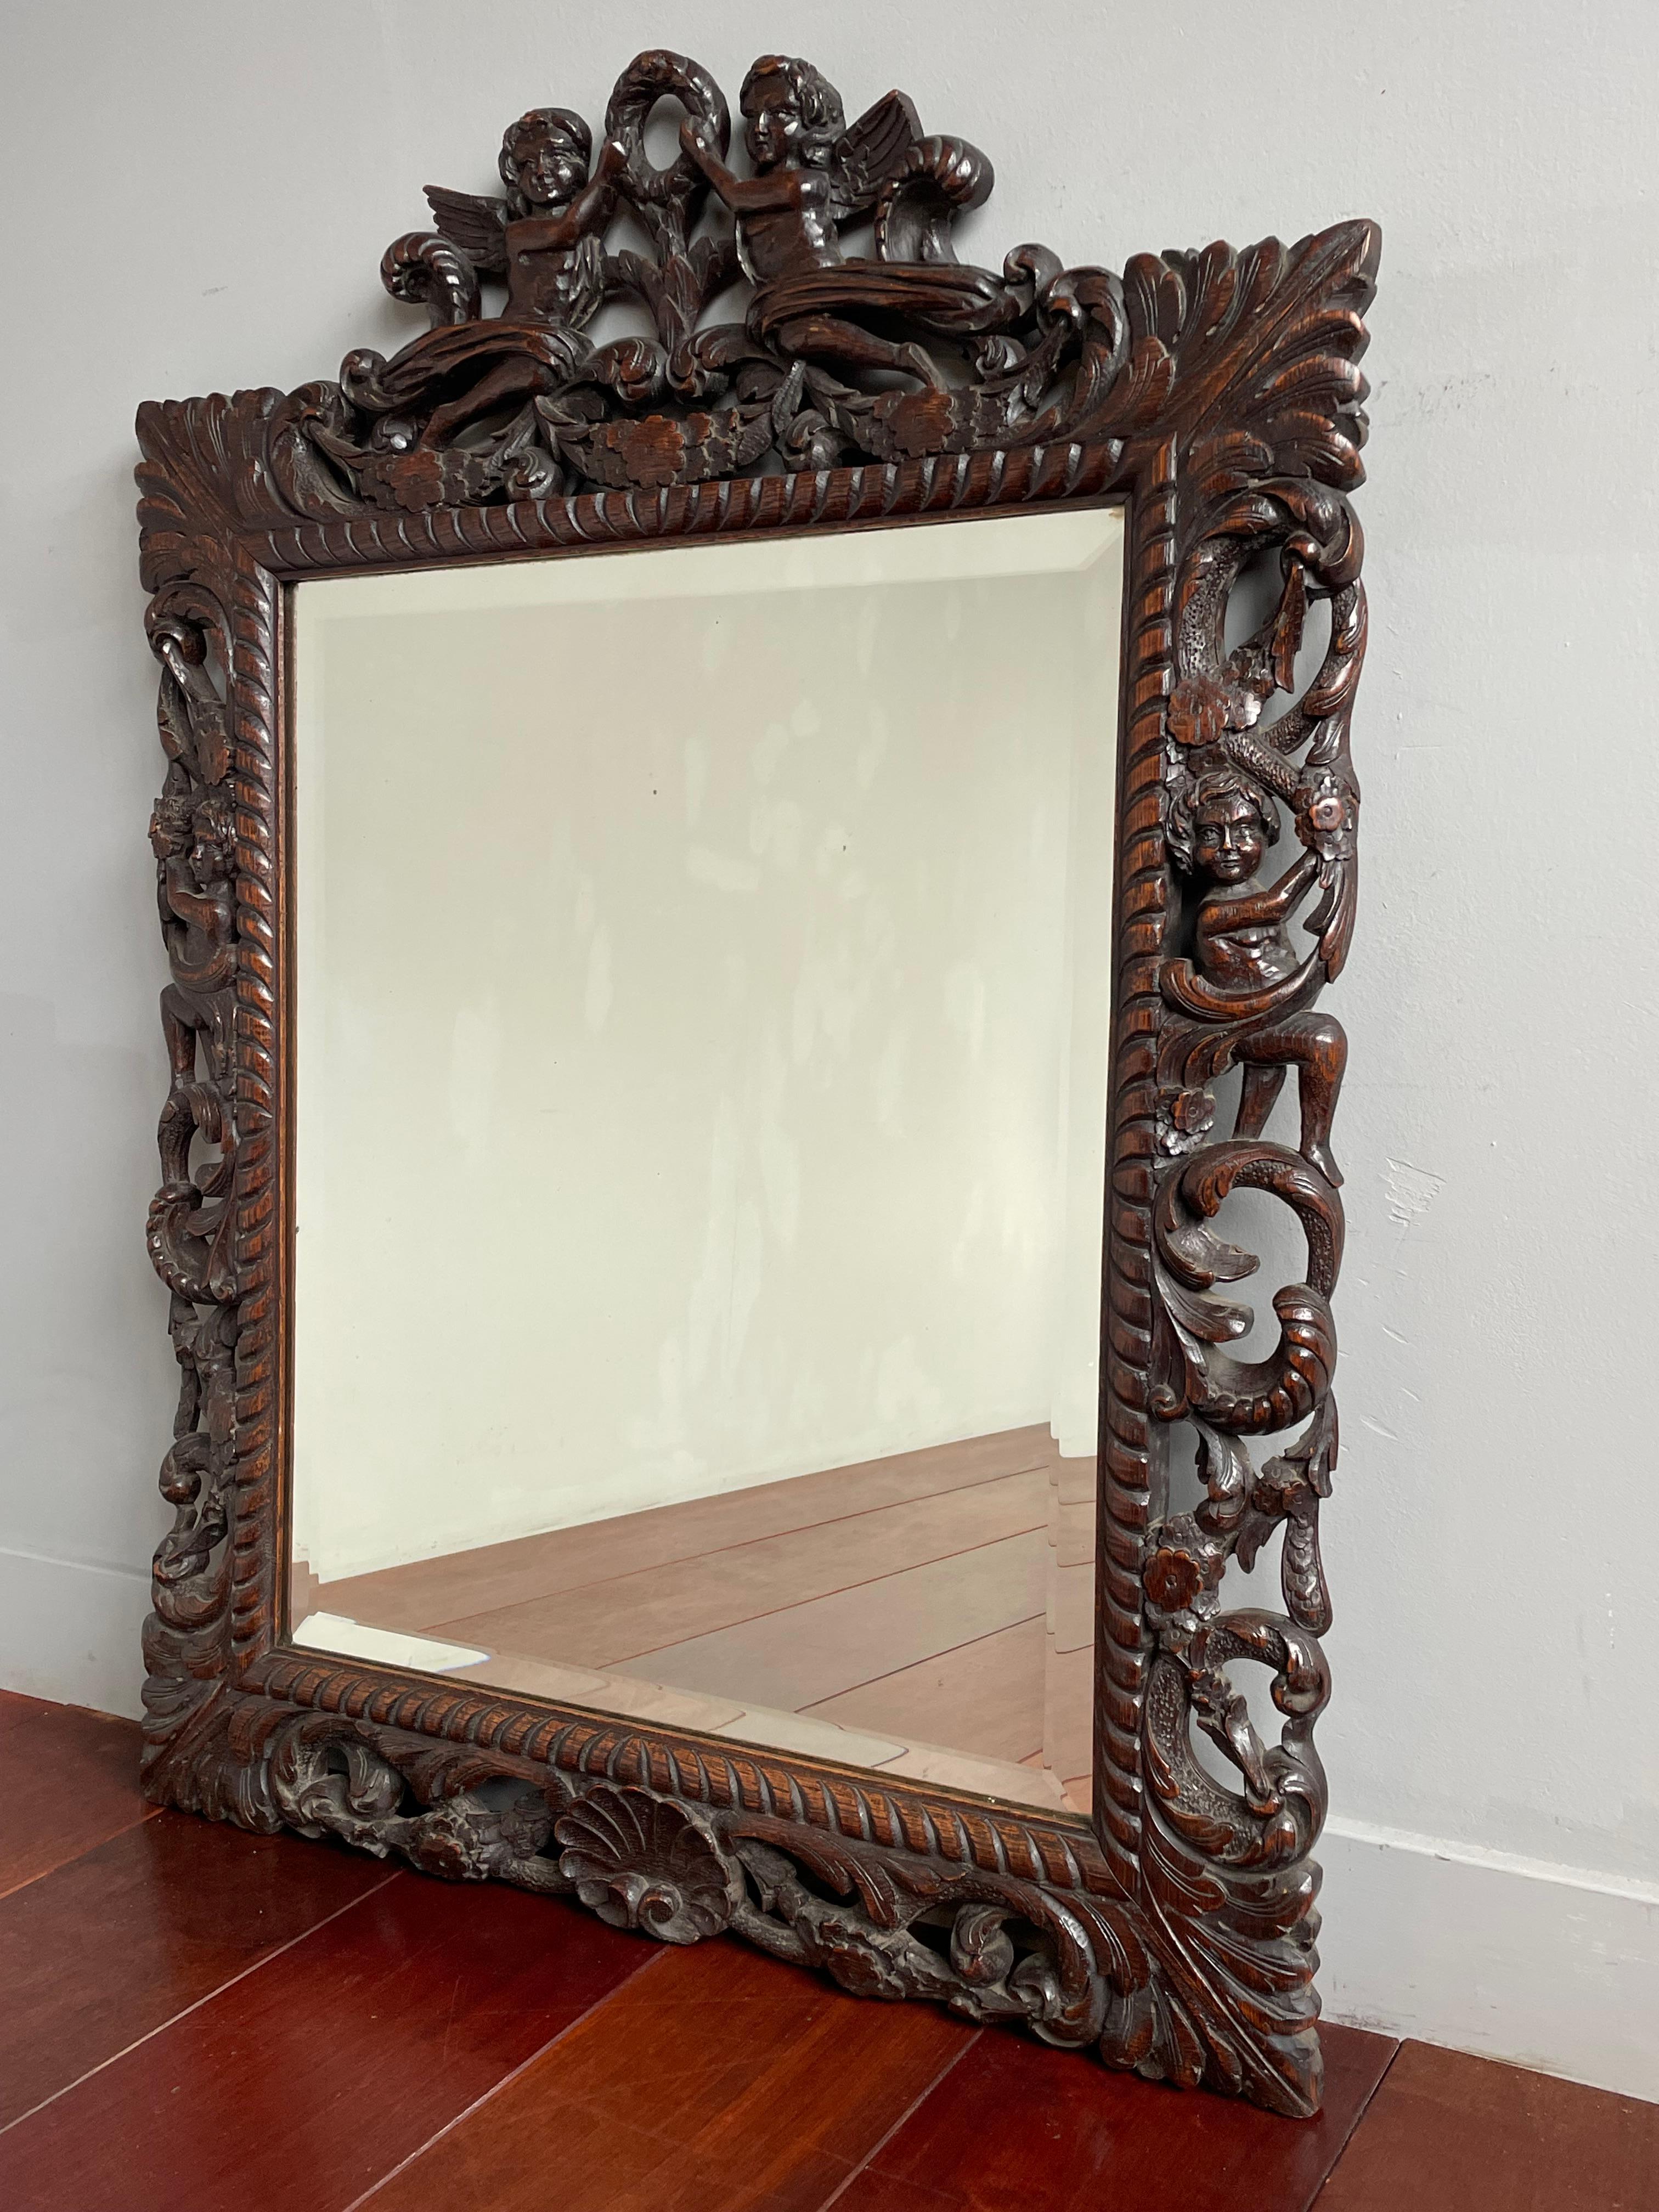 Great quality carved and ideal size Renaissance Revival wall or mantel mirror.

If you are familiar with style elements of the Renaissance era then you will immediately recognize this good size mirror as a Renaissance Revival antique. In this